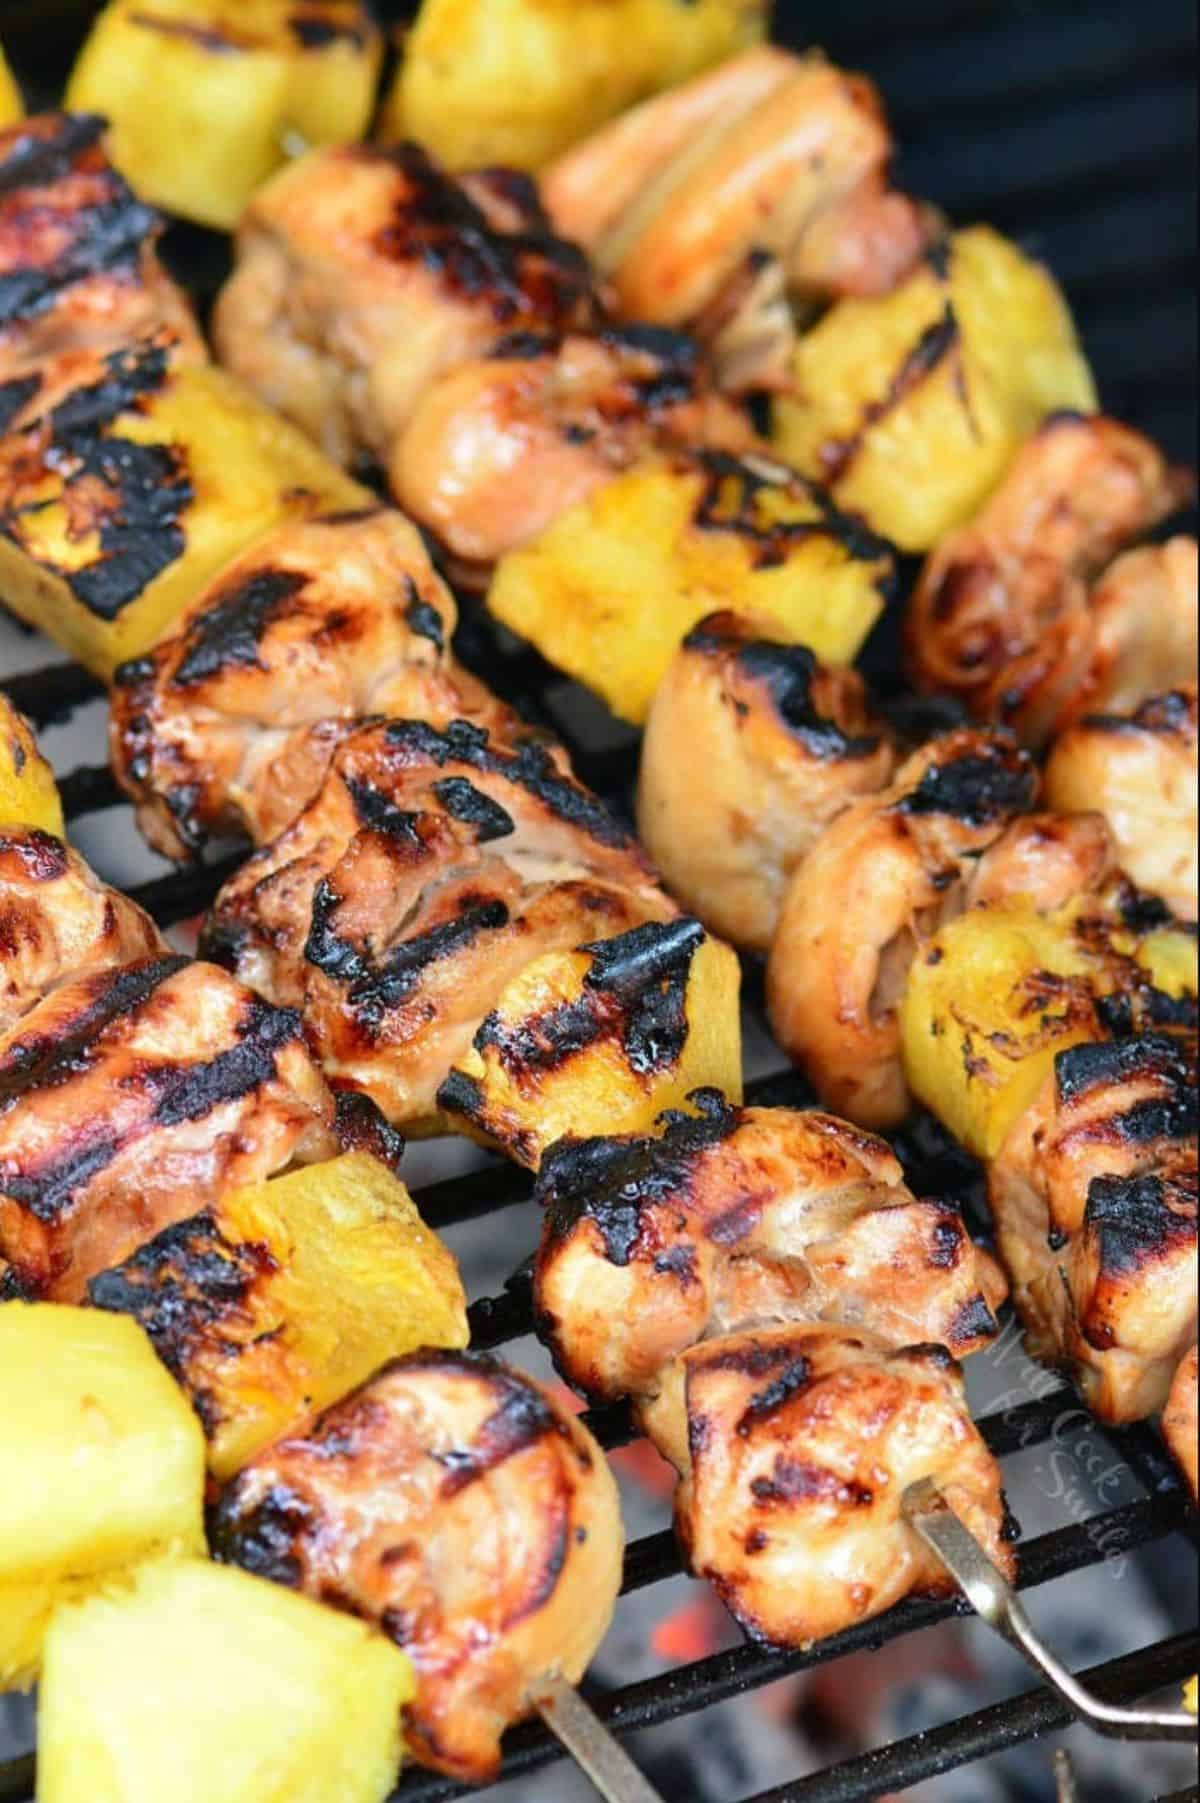 several grilled chicken and pineapple kebobs are on the grill